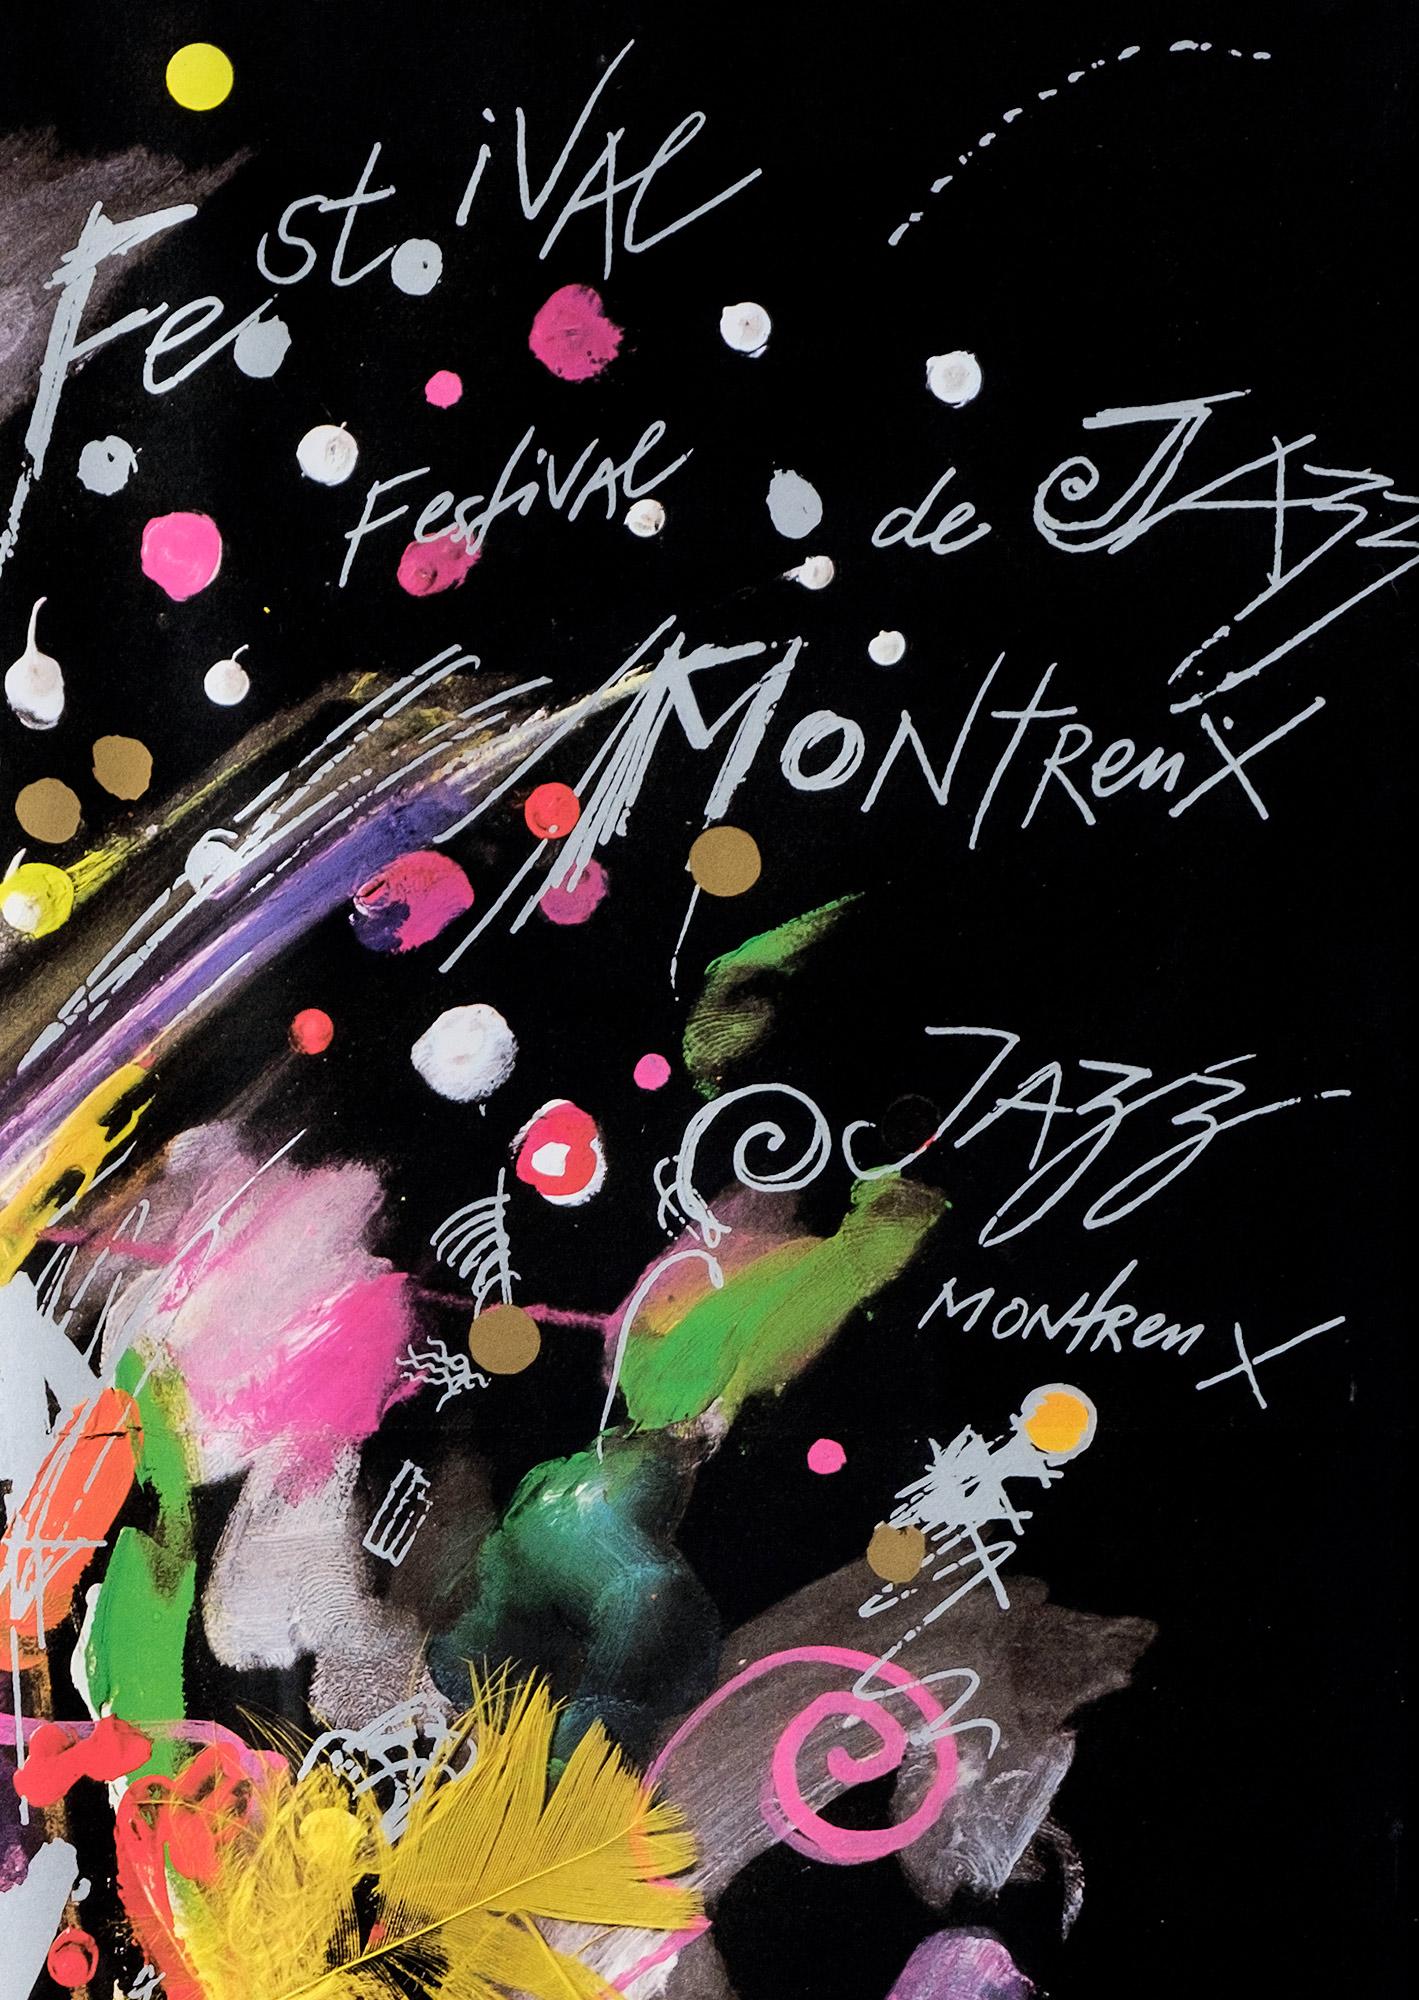 Original first edition silkscreen print of the Montreux Jazz Festival 1982 by Jean Tinguely printed by Aldrin Uldry, Berne

Jean Tinguely (1925-1991) was a Swiss sculptor best known for his kinetic art sculptural machines that extended the Dada